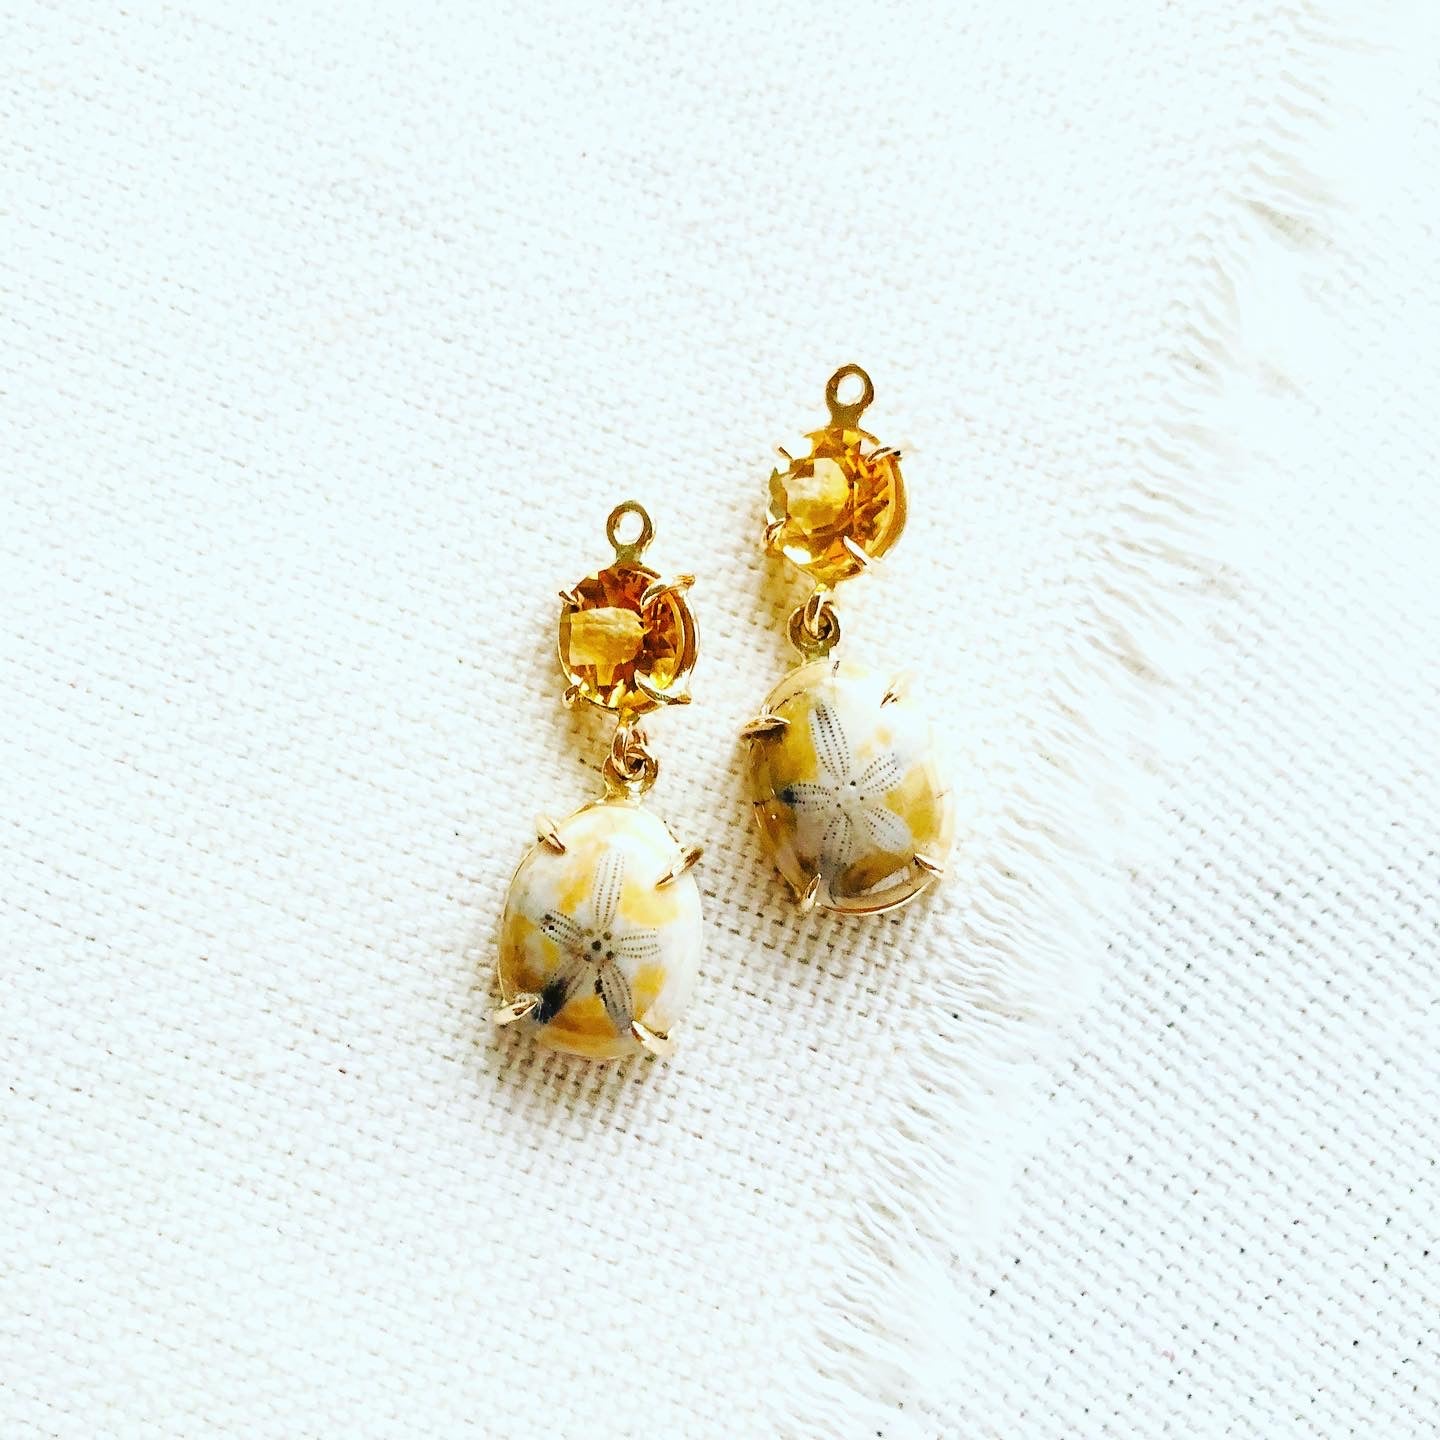 Sea urchin earrings paired with citrine and set in 14kt gold. These fossilized sea urchin earrings make a beautiful long lasting souvenir from Hawaii.